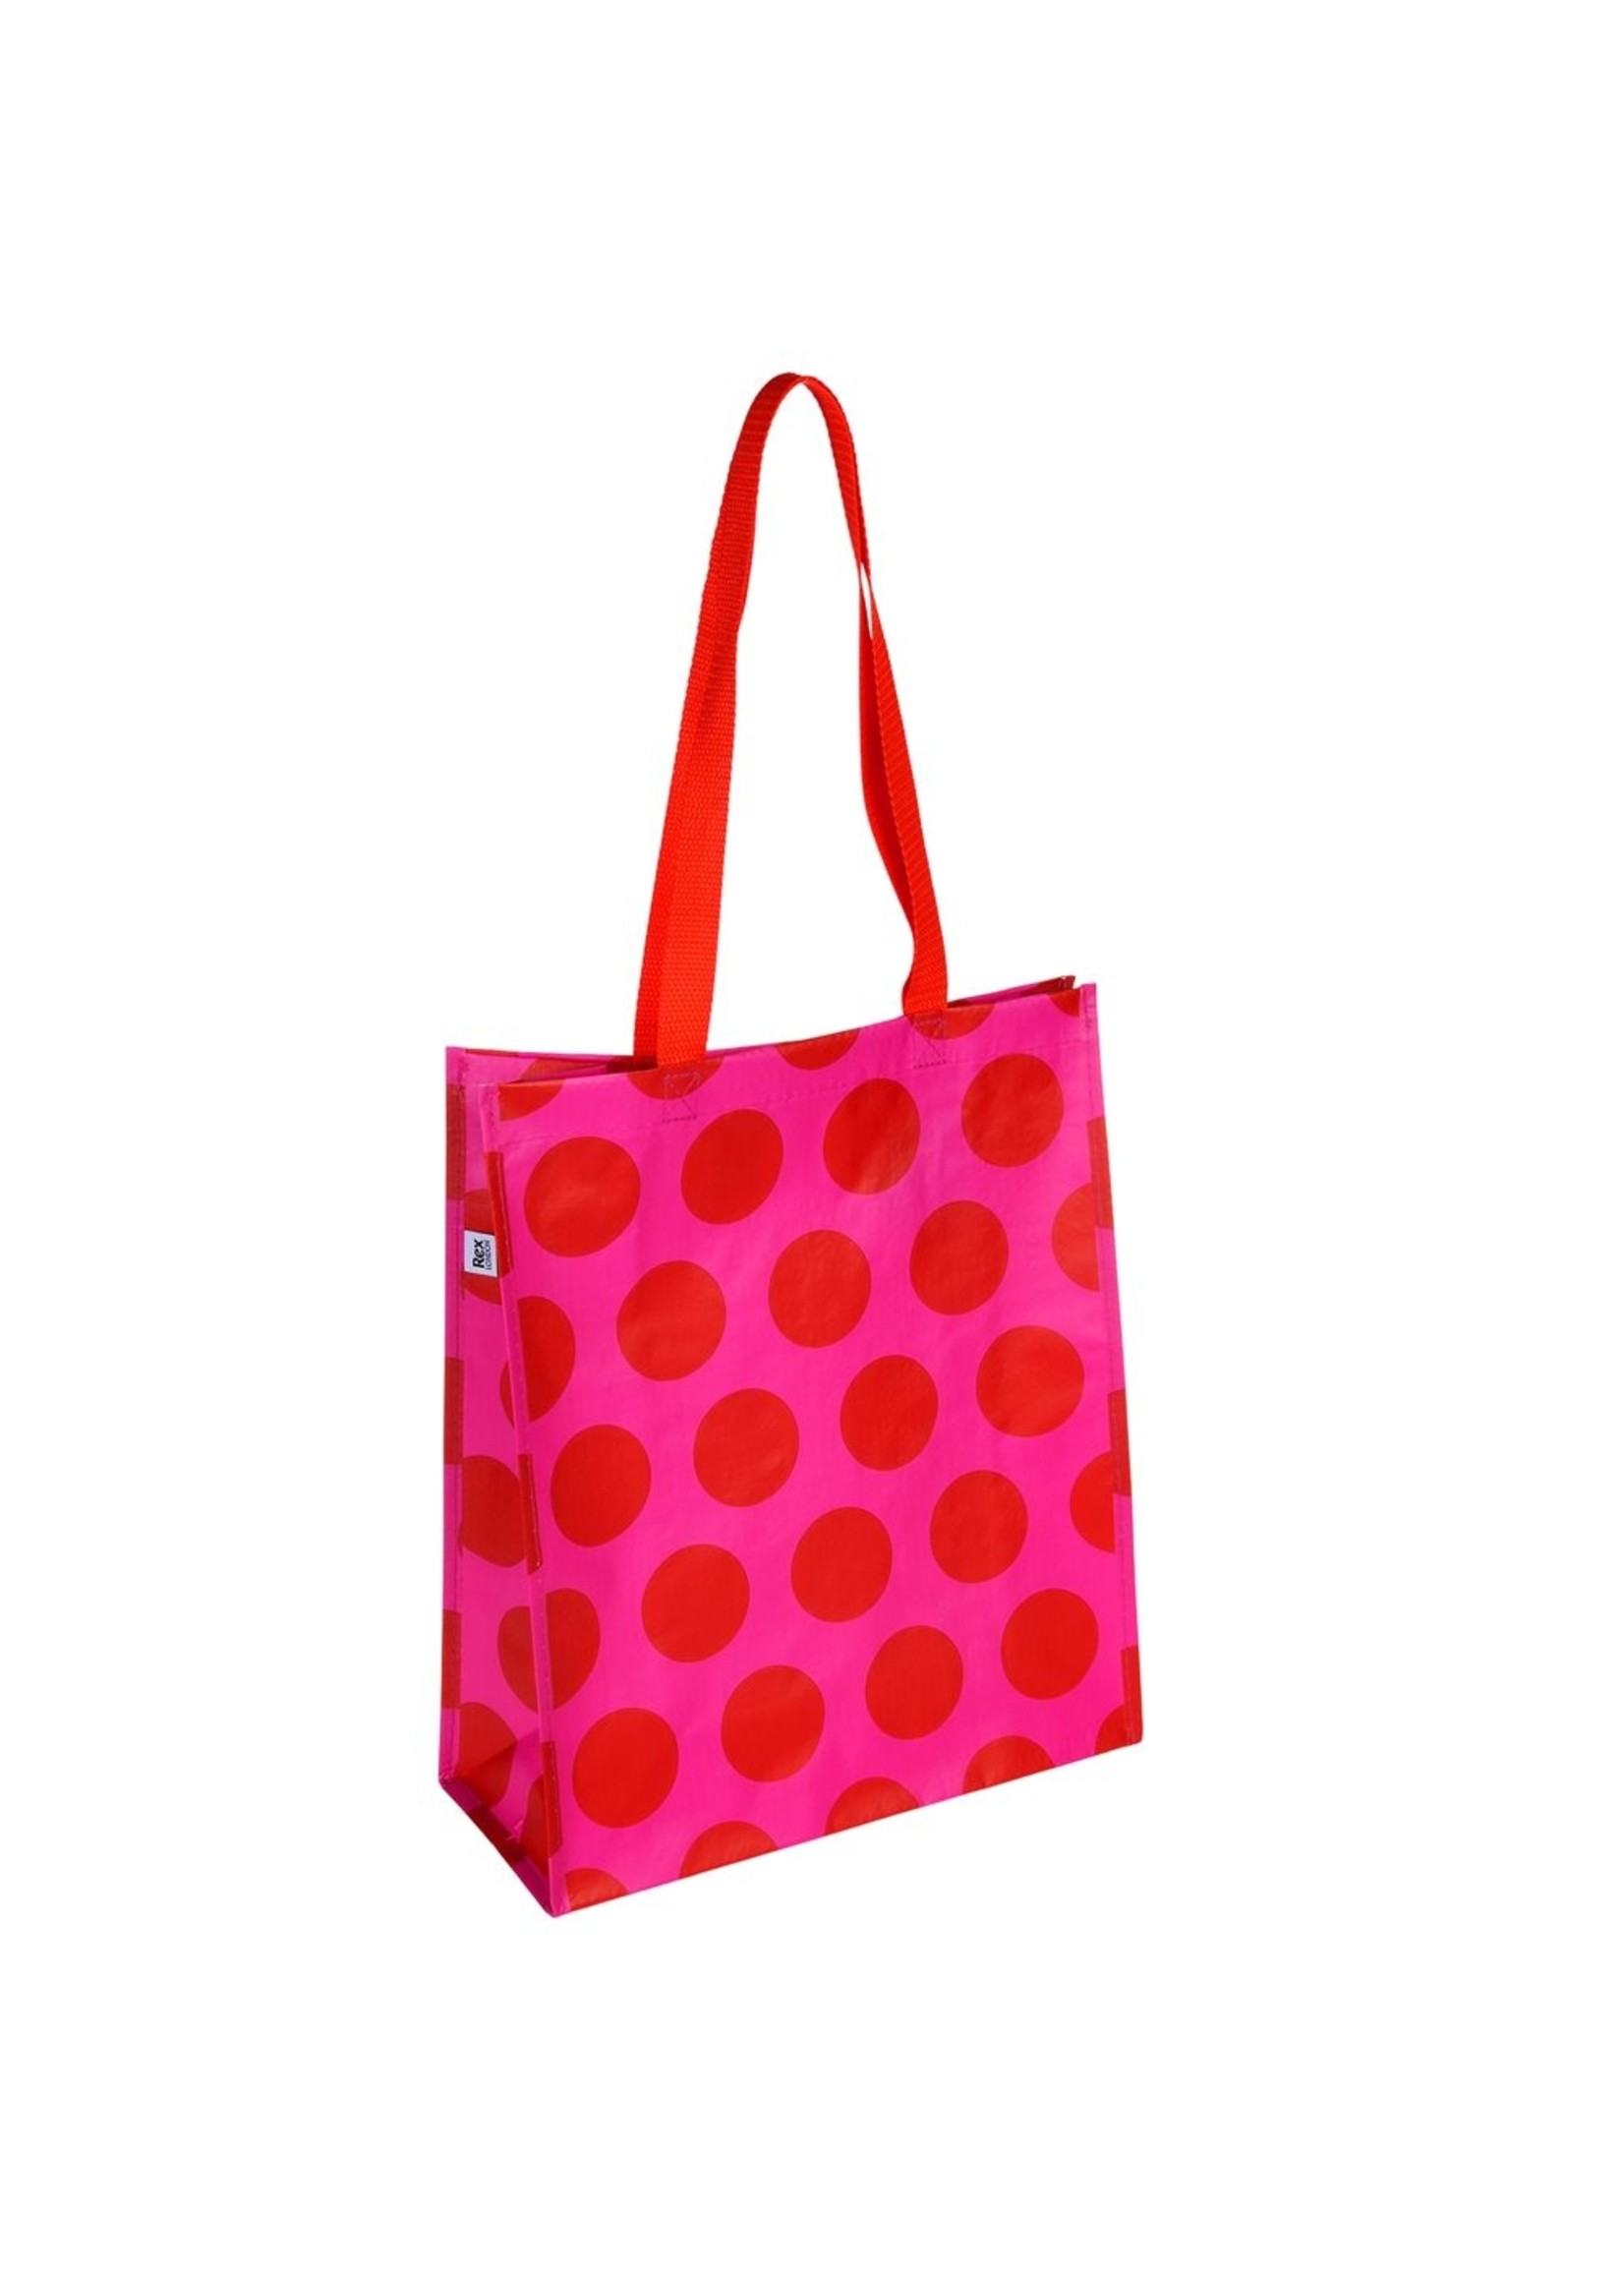 Rex London Shopper 40x34 cm recycled plastic - Fuchsia with red dots